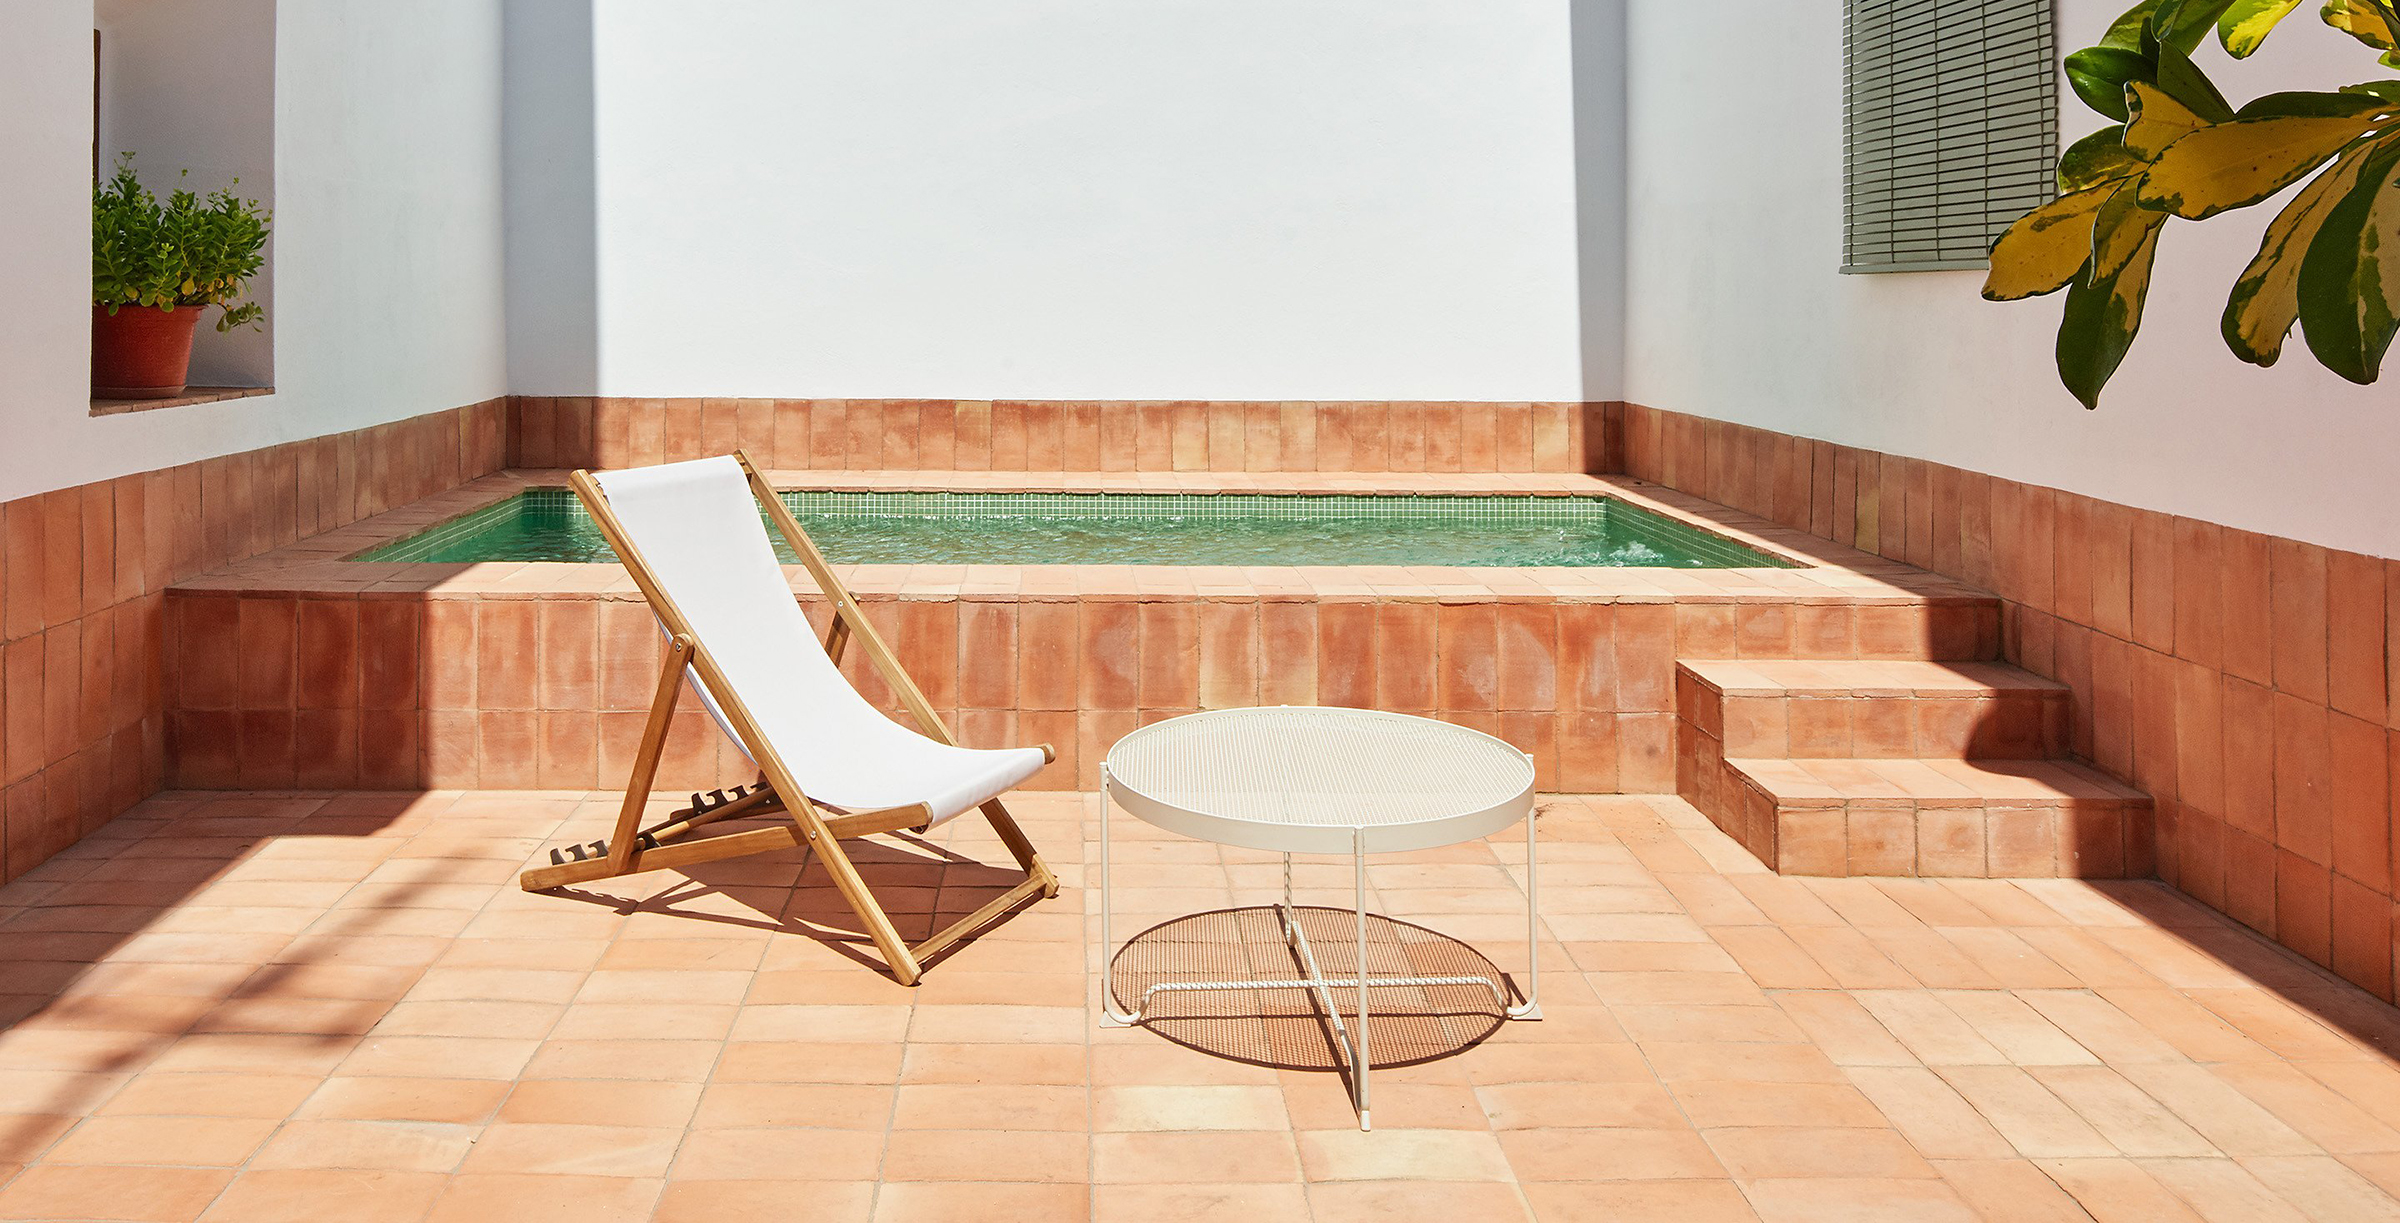 pool on the back in terracotta